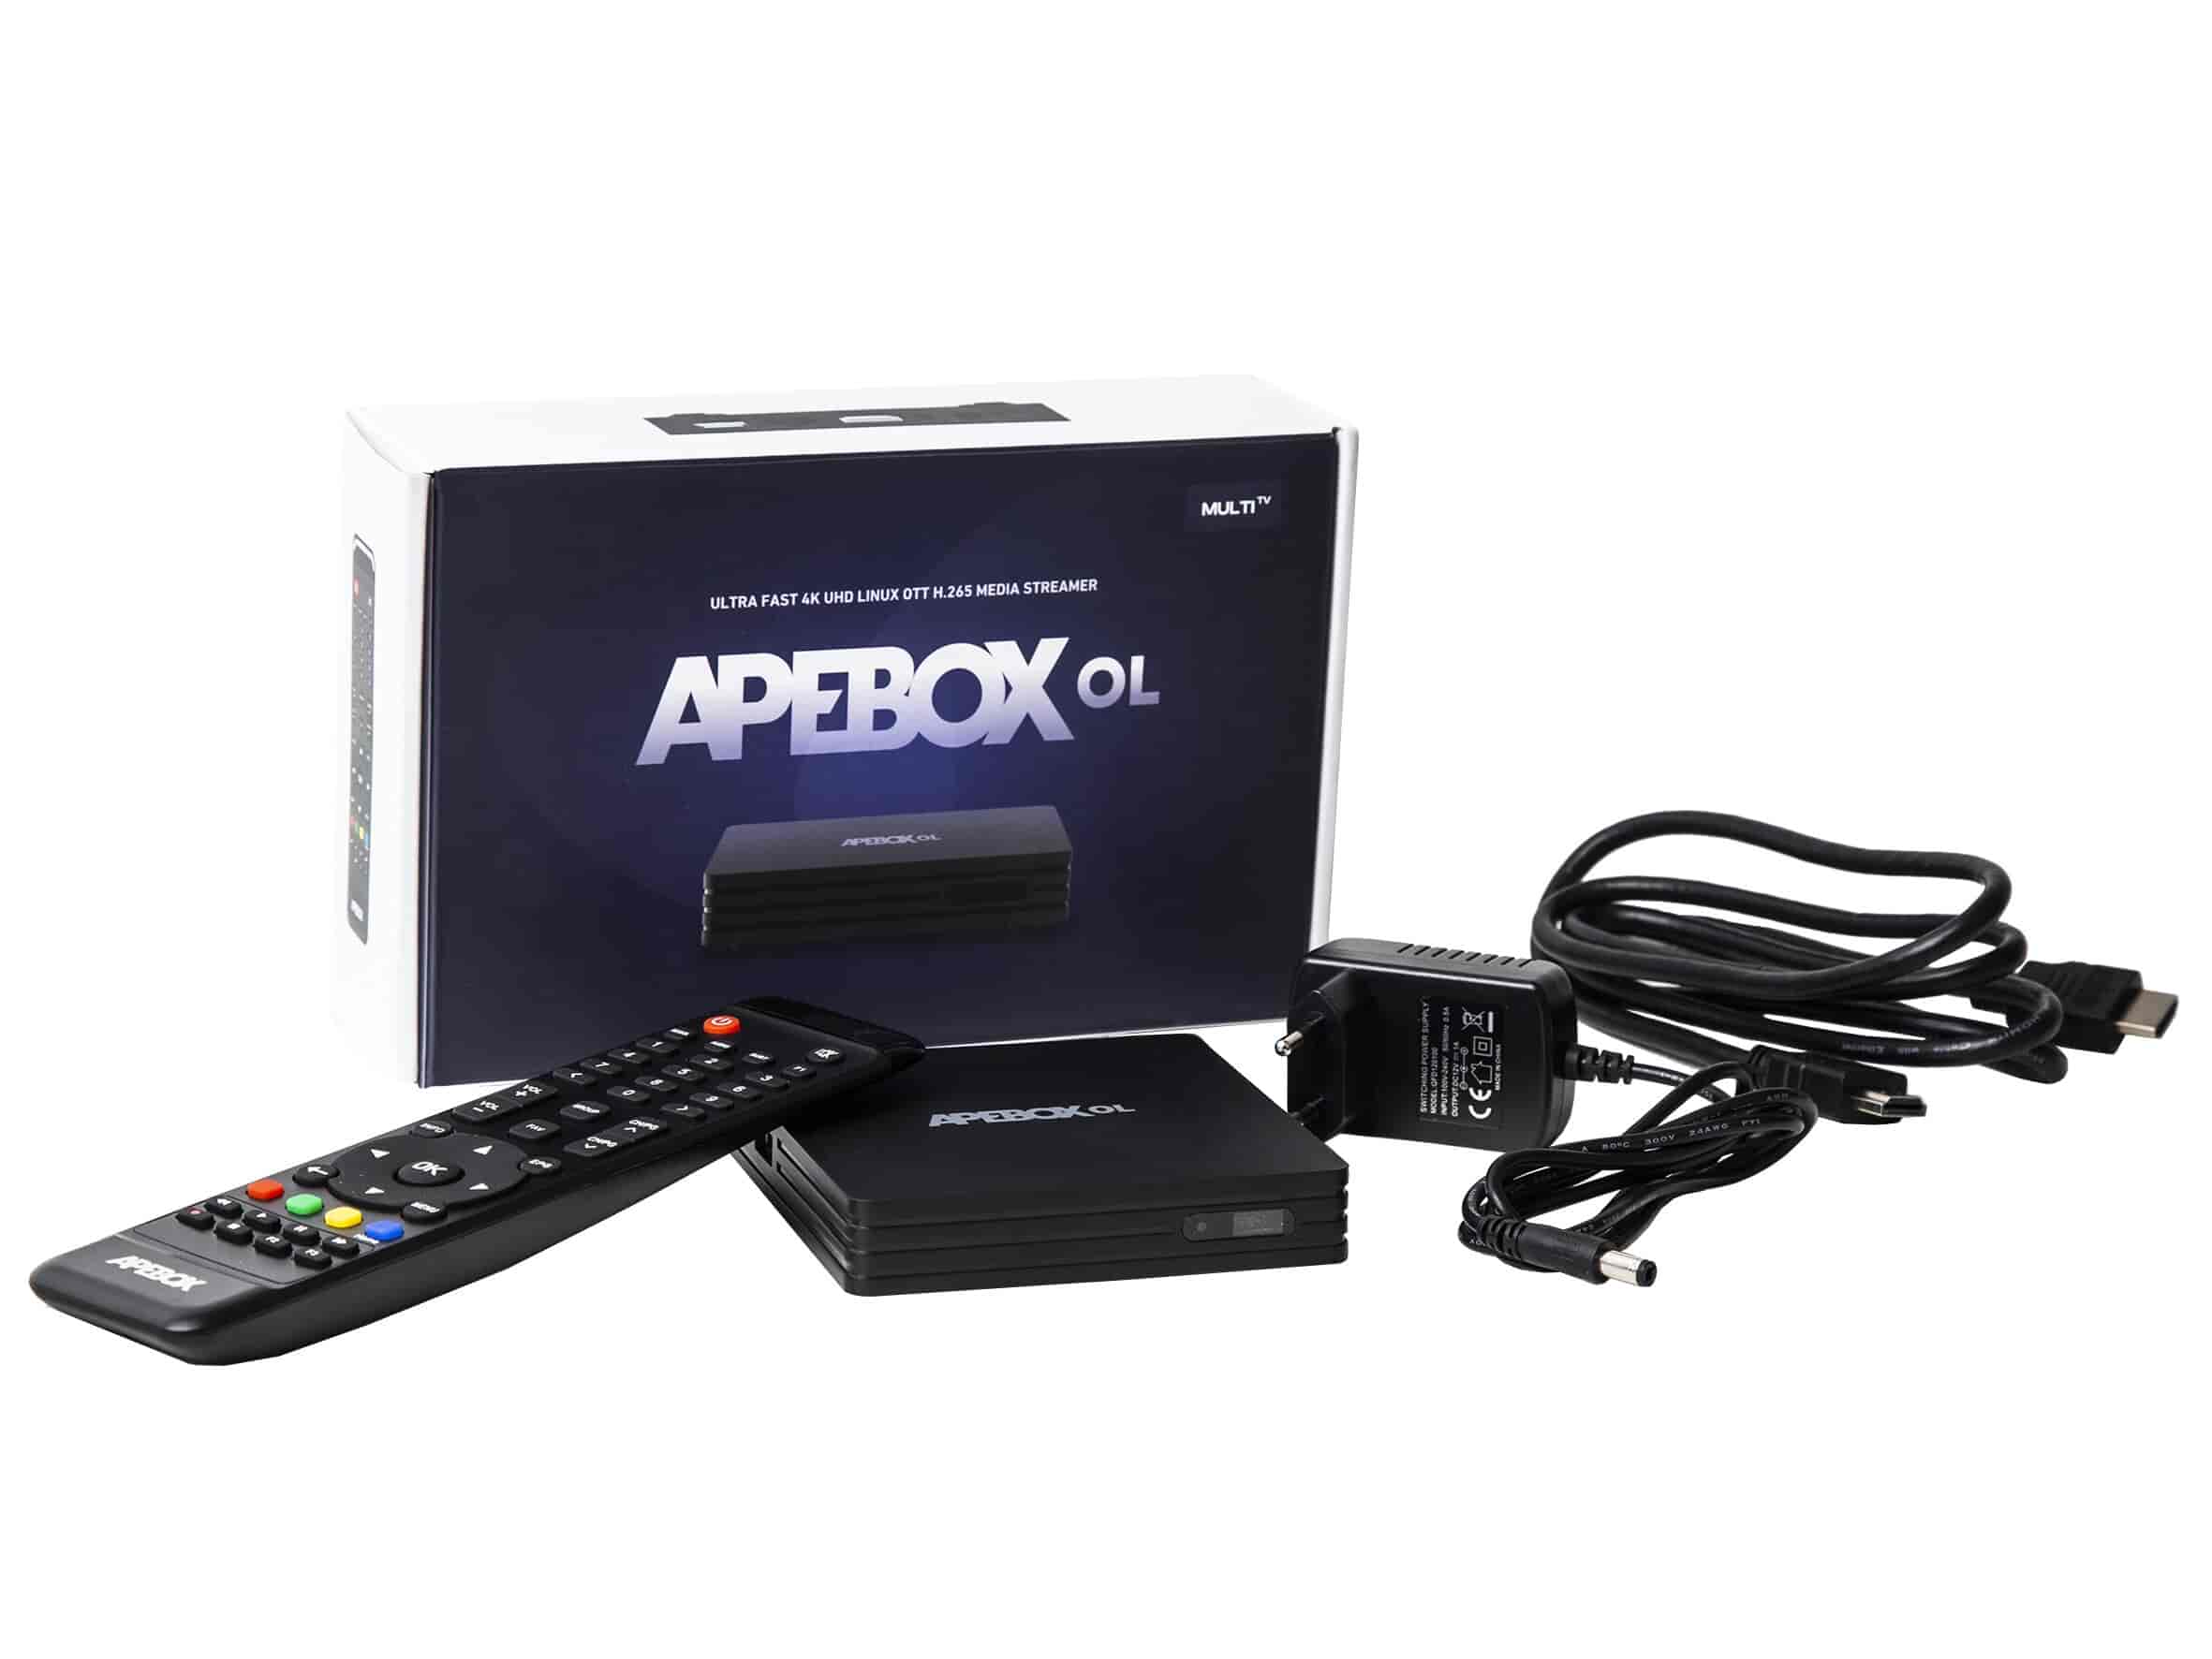 Apebox OL - 4K UHD IPTV box media streamer (Stalker, Xtream,M3U)Apebox OL IPTV is a powerful, stable, fast and user-friendly Linux OTT UHD 2160p IPTV receiver. It supports HDR10 HLG 10 bit H.265 and is ideal for those looking for a simple but effective IPTV Full 4K multimedia receiver at an affordable and absolutely fair price. Multi TV protocol allows processing of Stalker, Xtream and M3U. Dual WiFi, 100 Mbps LAN, HDR10HLG, H.265,VP9, 8 GB Flash, 1 GB DDR3, USB2.0. With a nice new easy-to-use remote control.Apebox OL effortlessly connects to a wide range of streaming services, giving you access to an extensive library of entertainment options. From popular video-on-demand platforms to live TV broadcasts, this versatile device caters to all your streaming needs, offering an extensive selection of channels and shows at your fingertips - supports Stalker, Xtream, M3U.Apebox